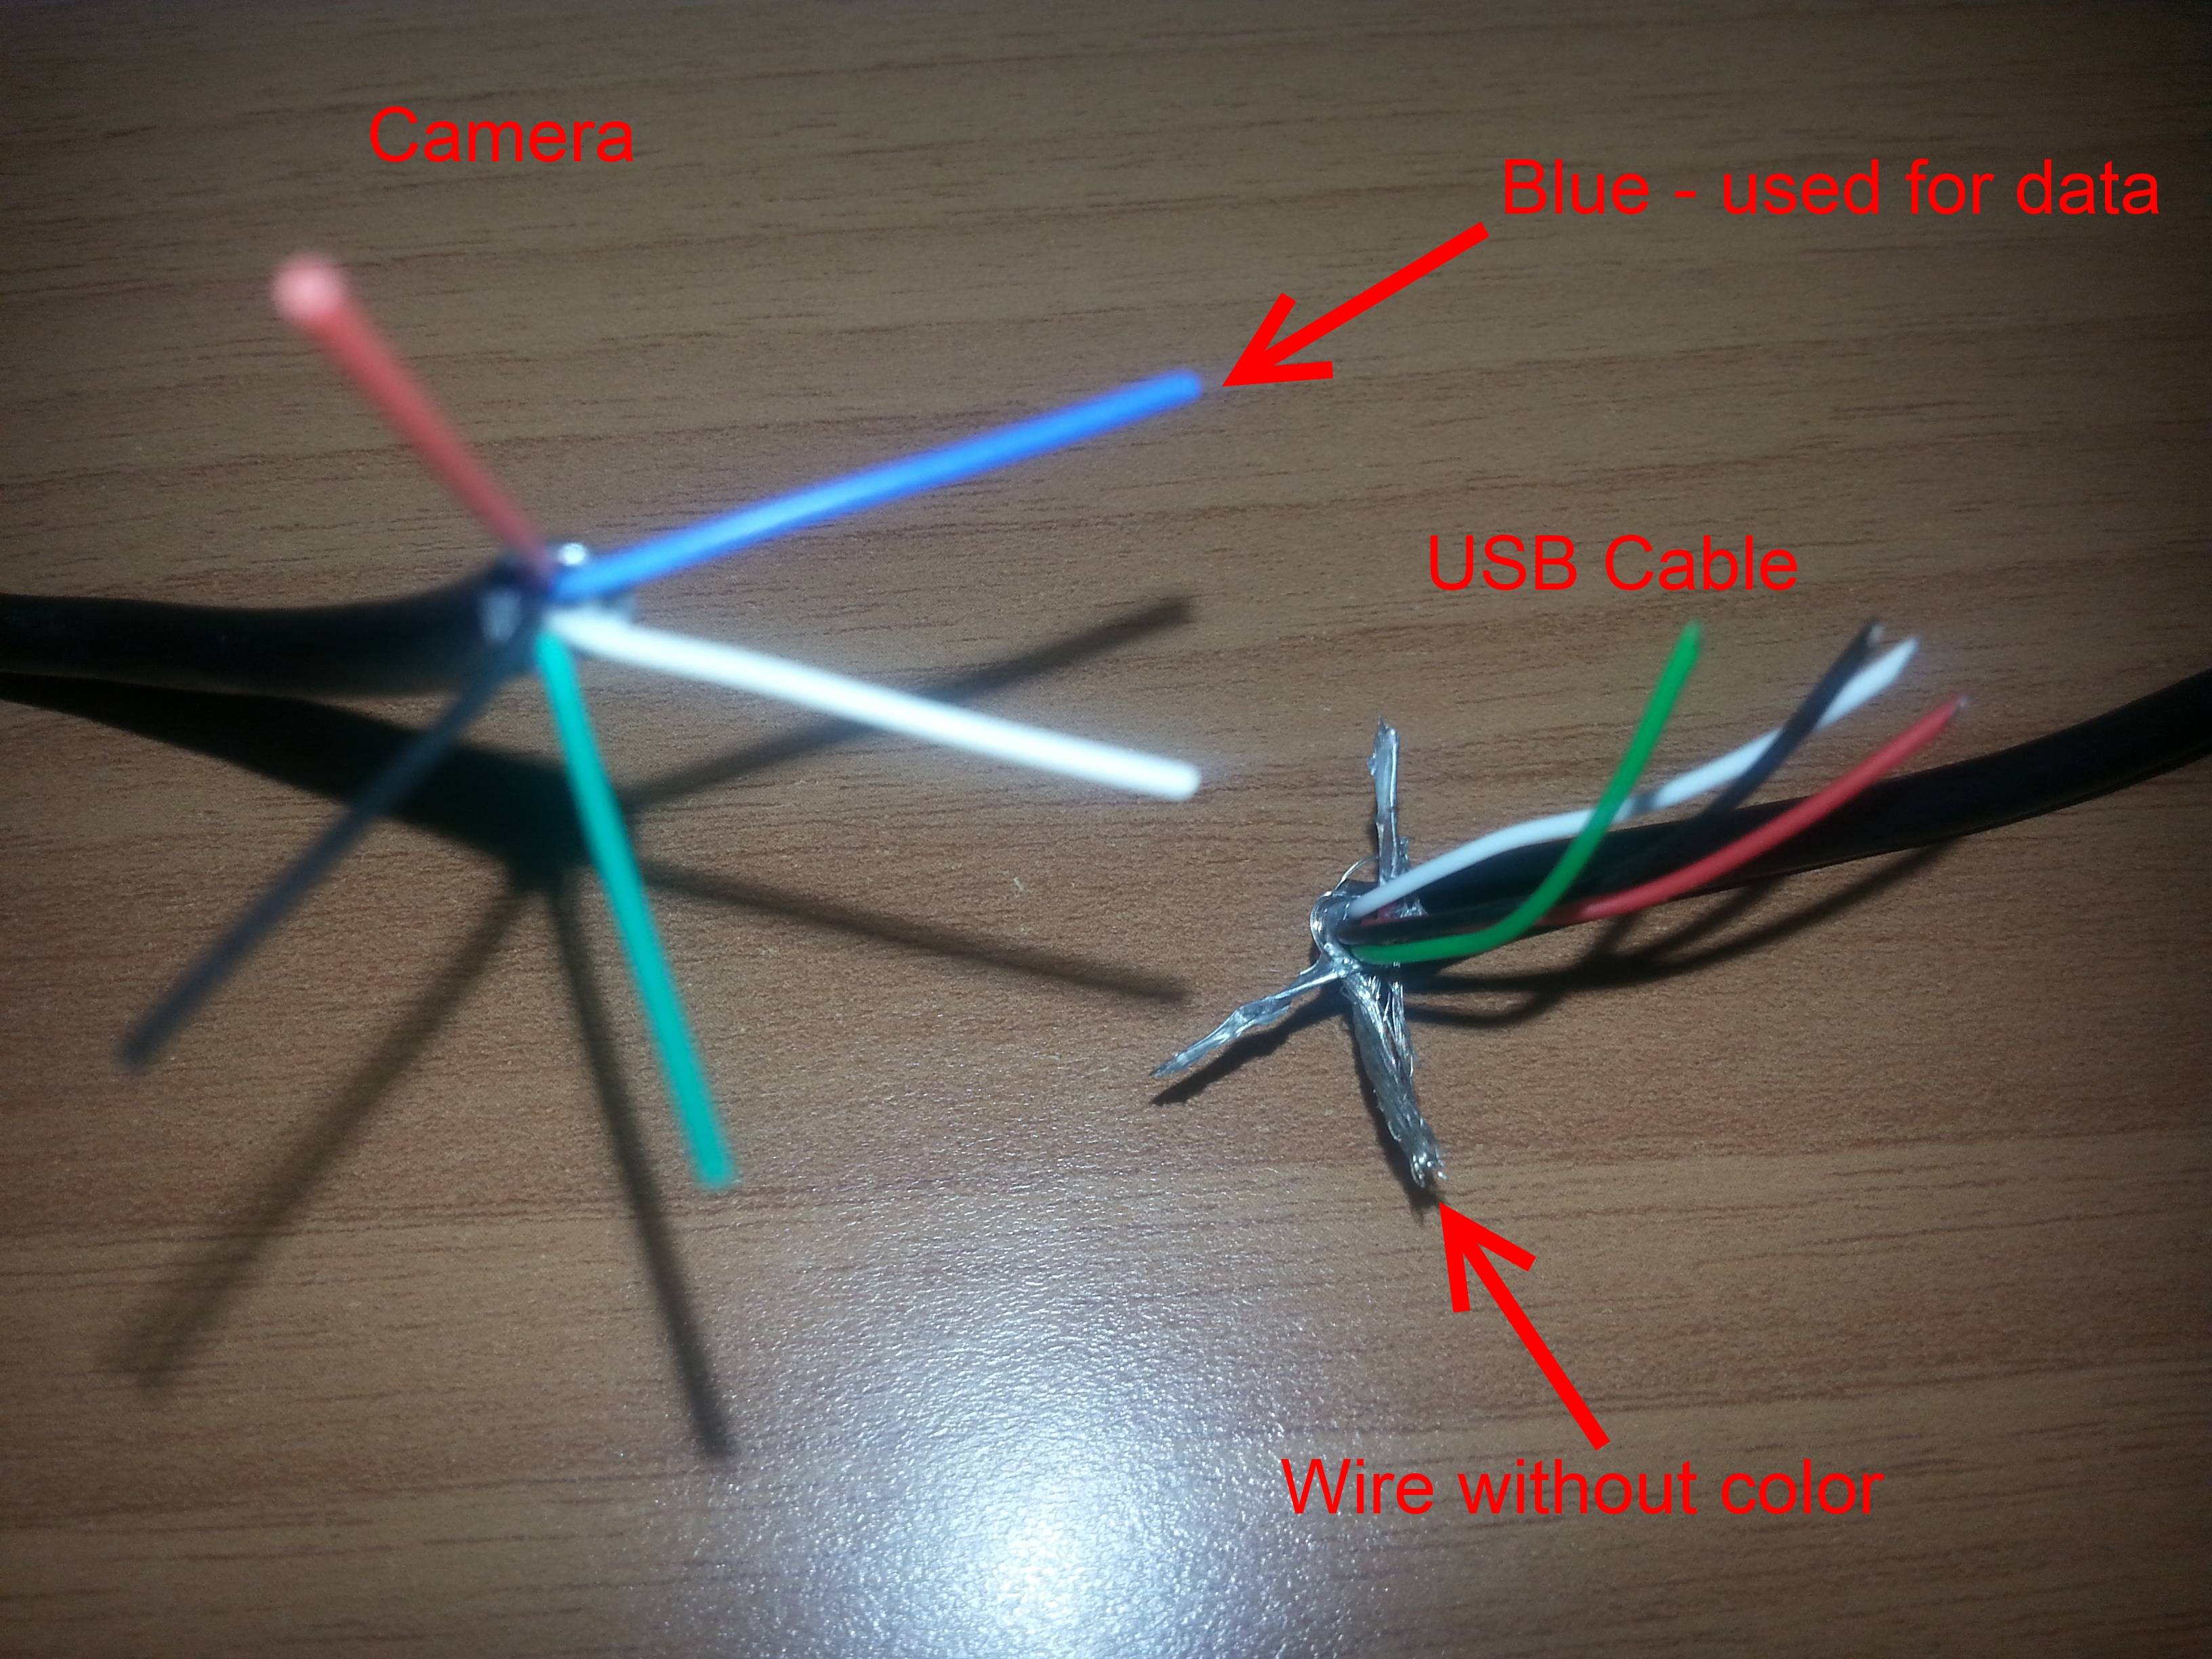 USB cable mismatch - Electrical Engineering Stack Exchange